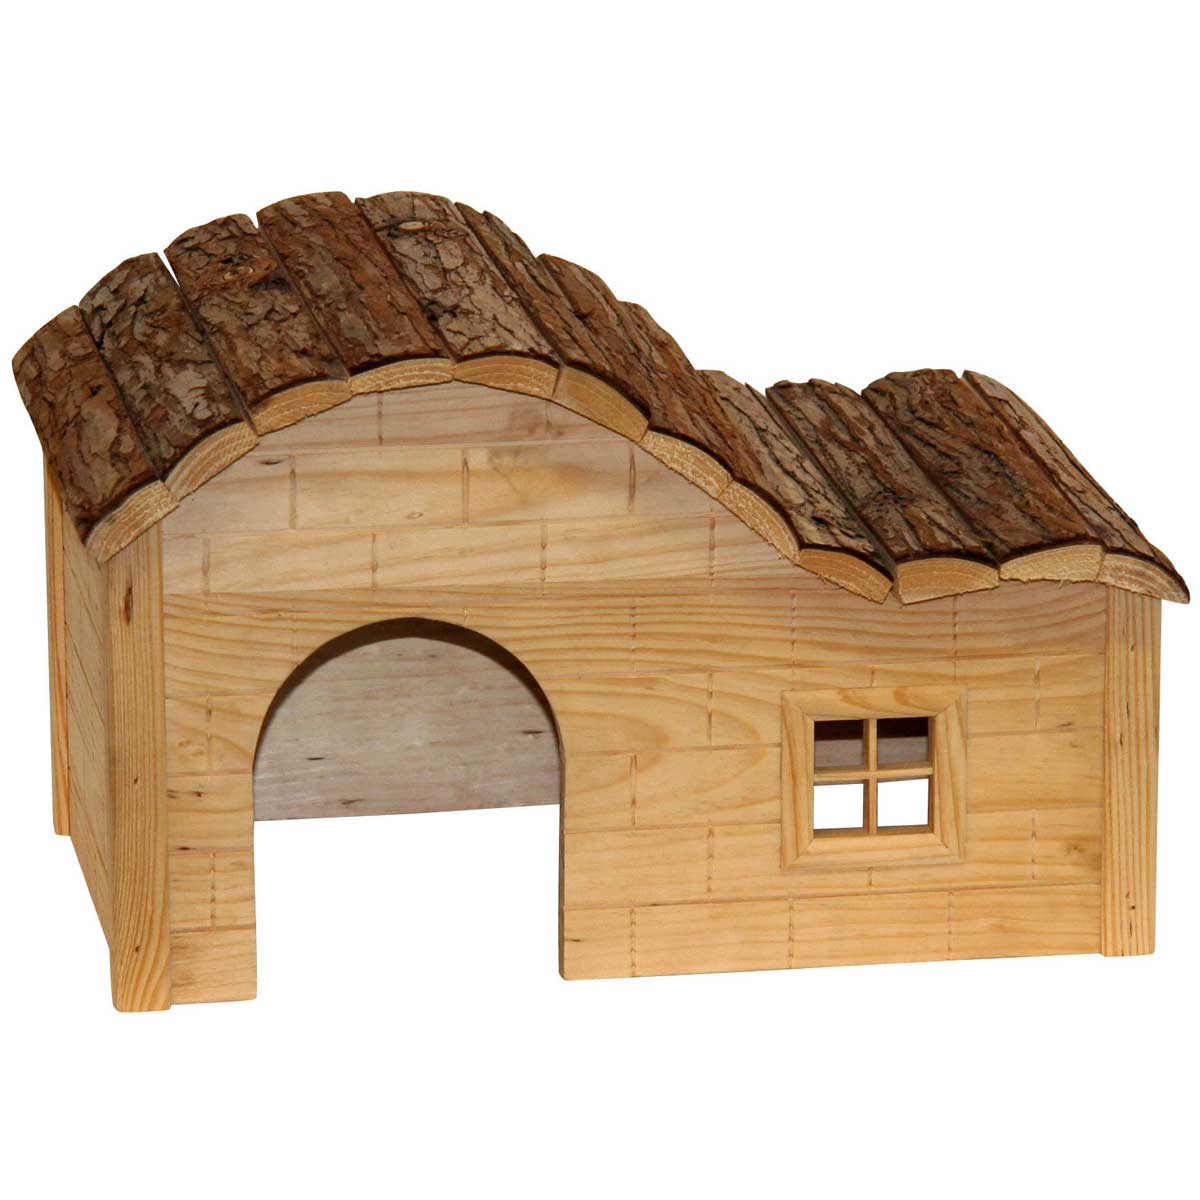 NATURE PLUS House with gently curved roof 40 x 25 x 25 cm